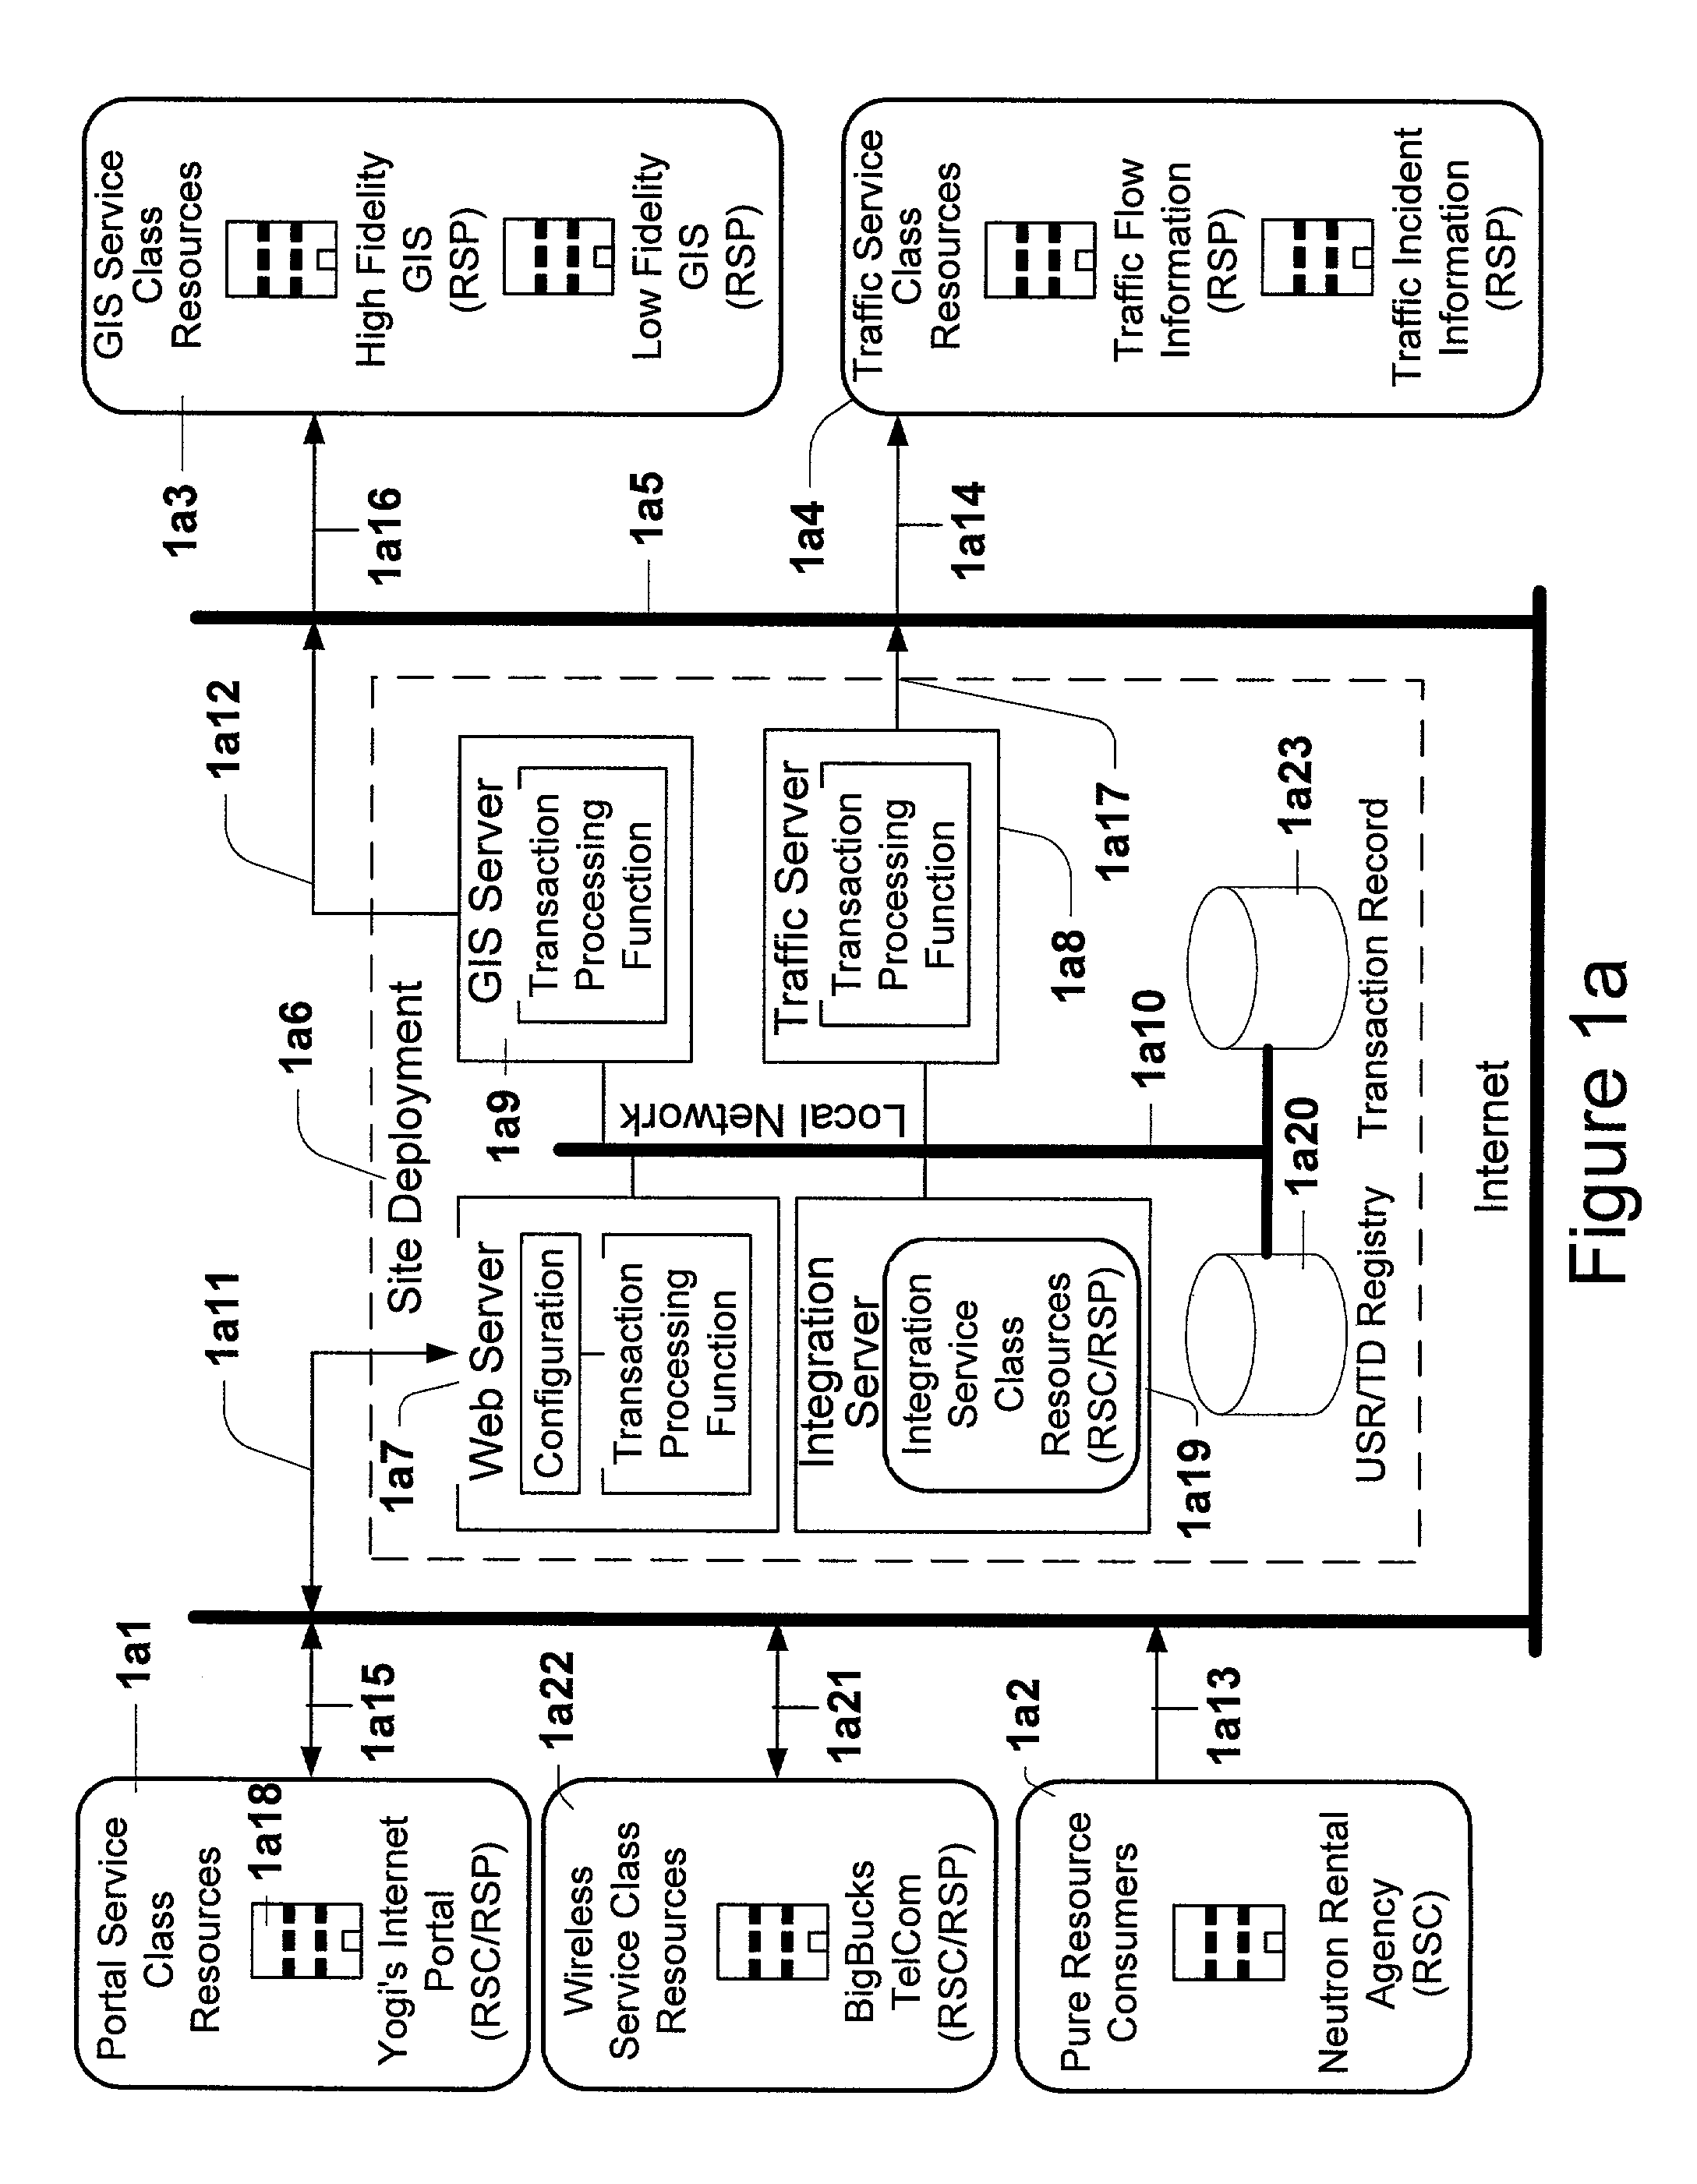 Method and system for generalized and adaptive transaction processing between uniform information services and applications